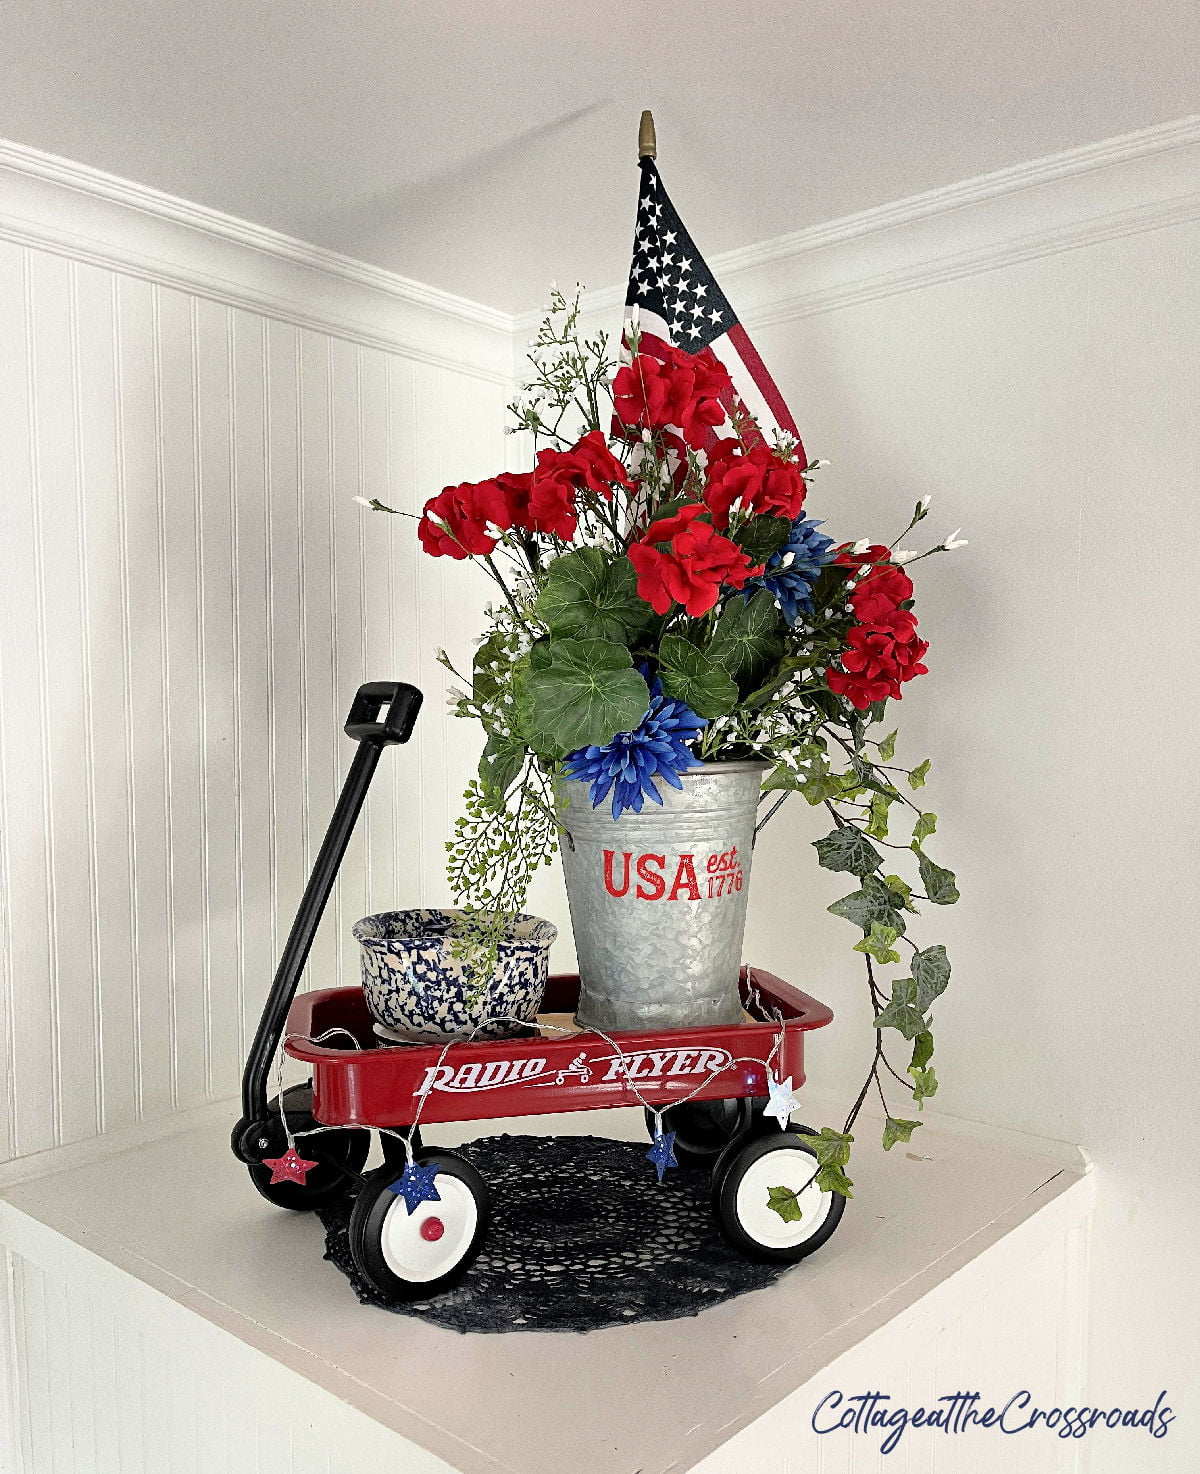 Patriotic decor in a little red wagon